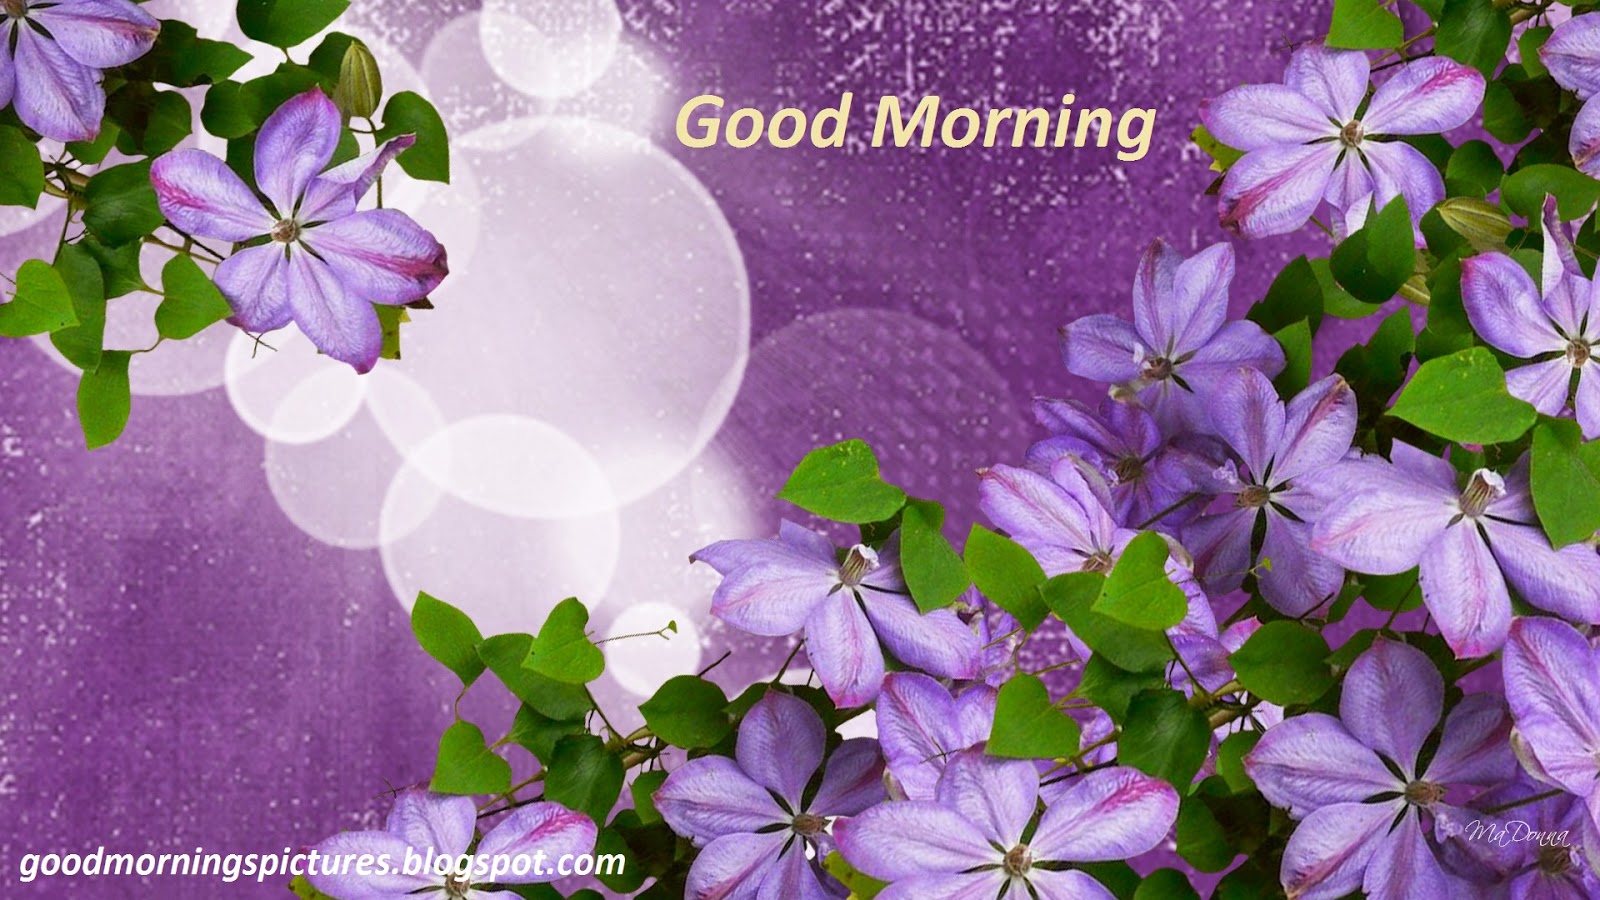 Top Good Morning Images Hd Of Flowers Twistequill